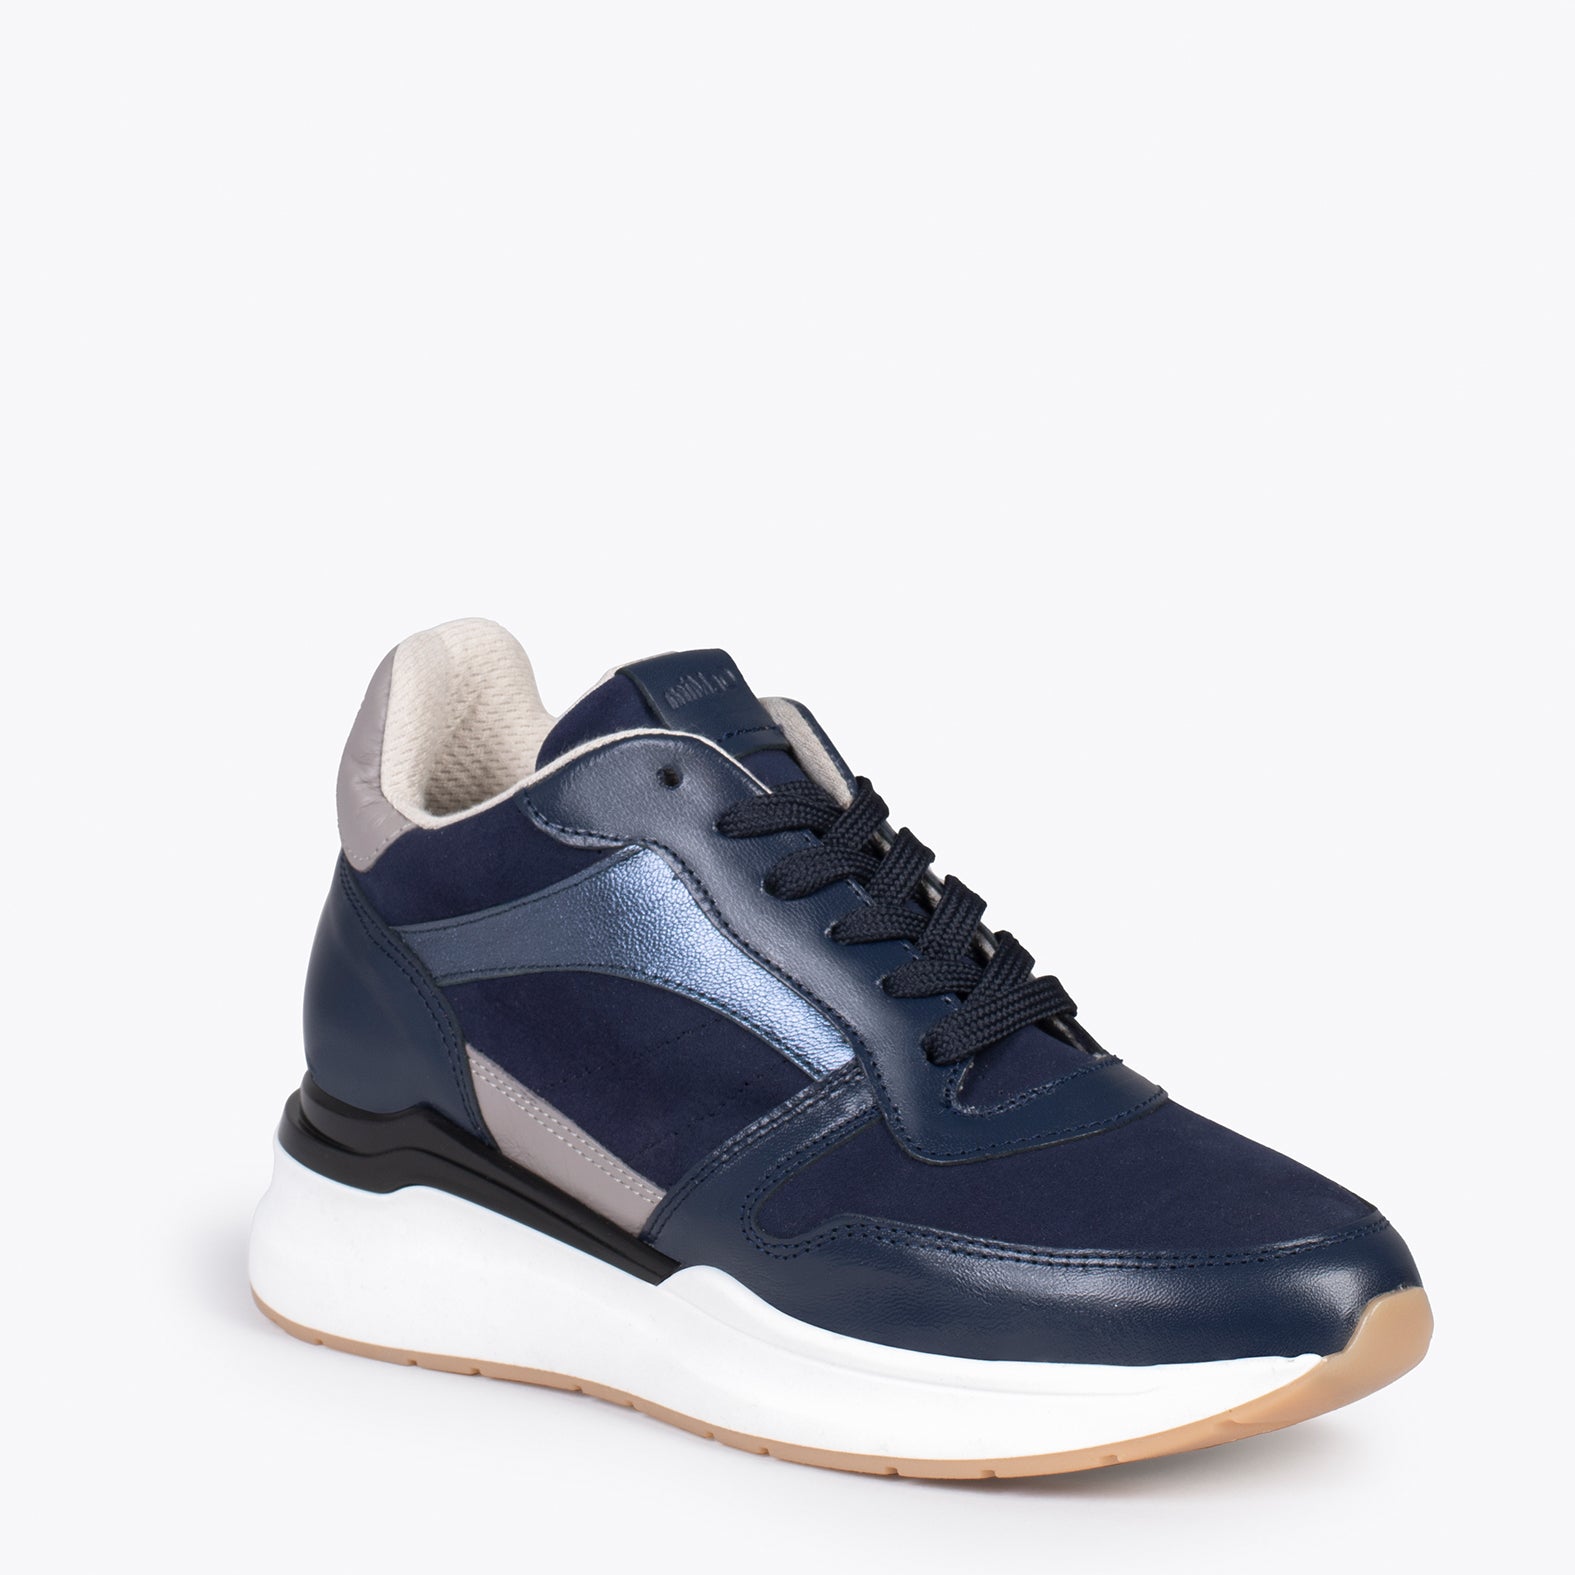 FREEDOM – NAVY sneakers with removable insole